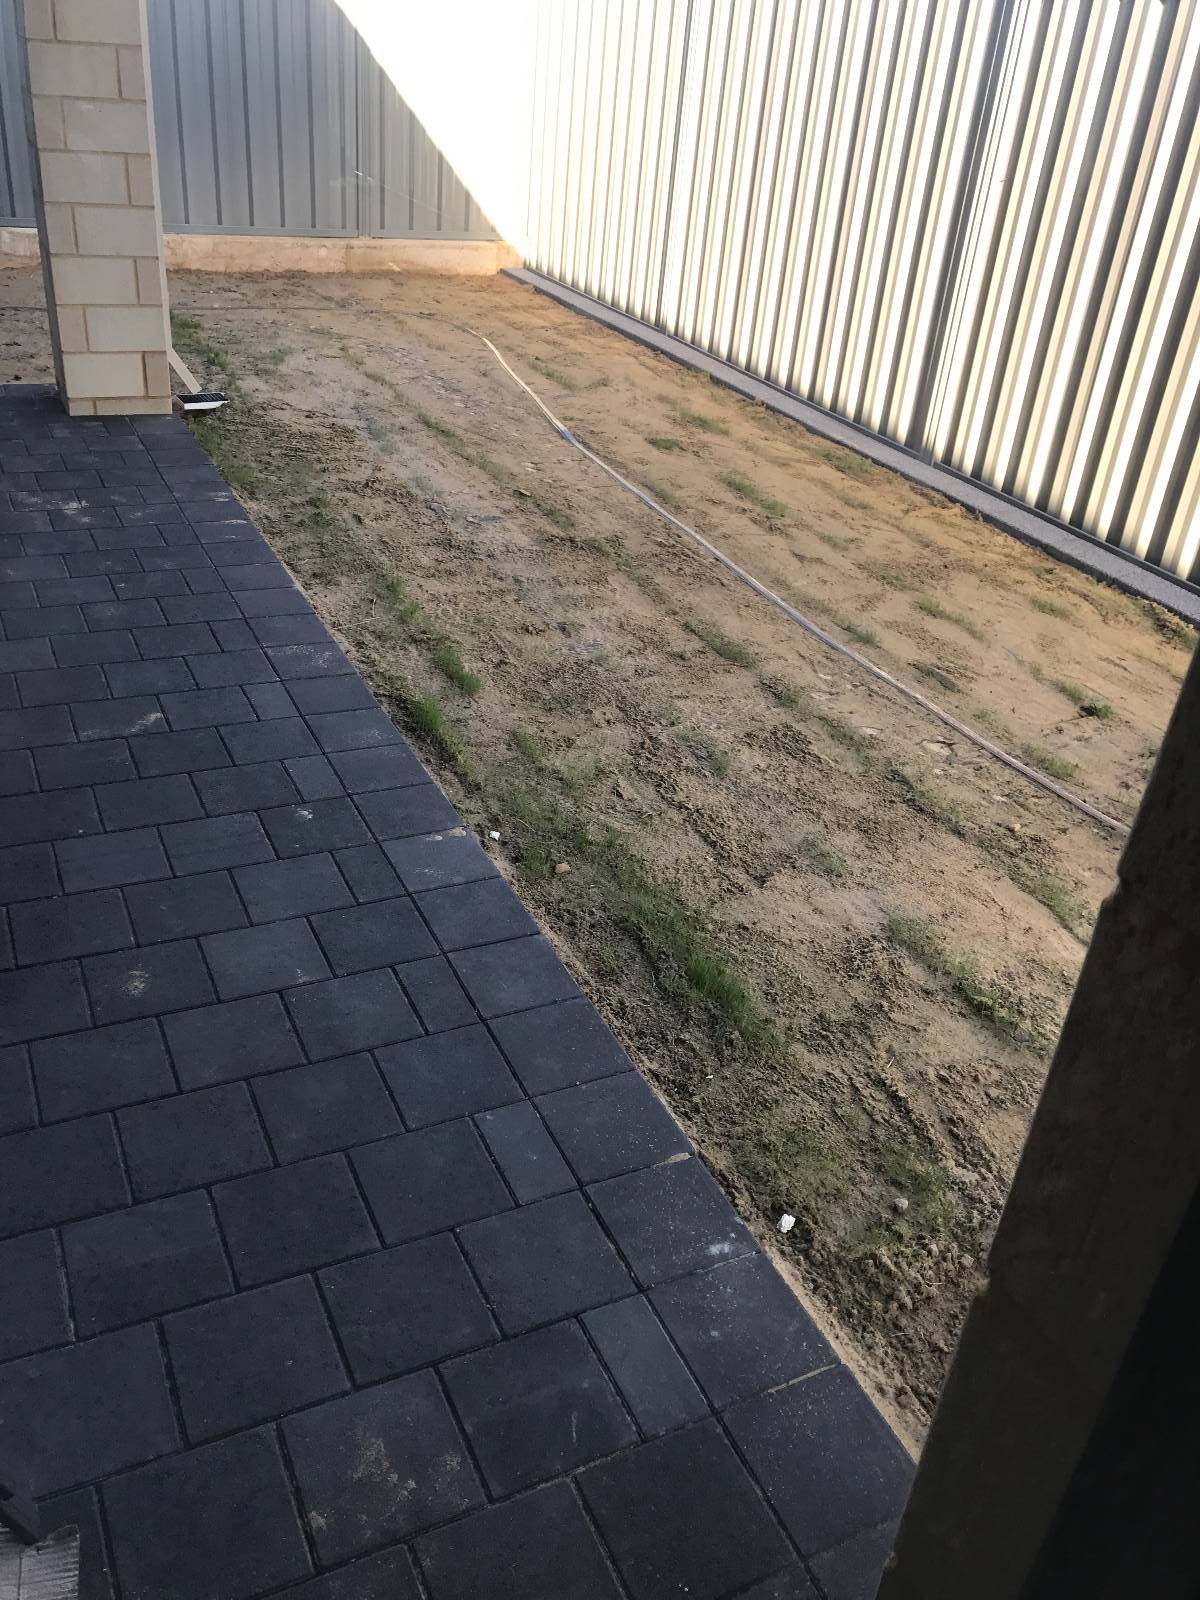 New grass really spread out, should I be worried?